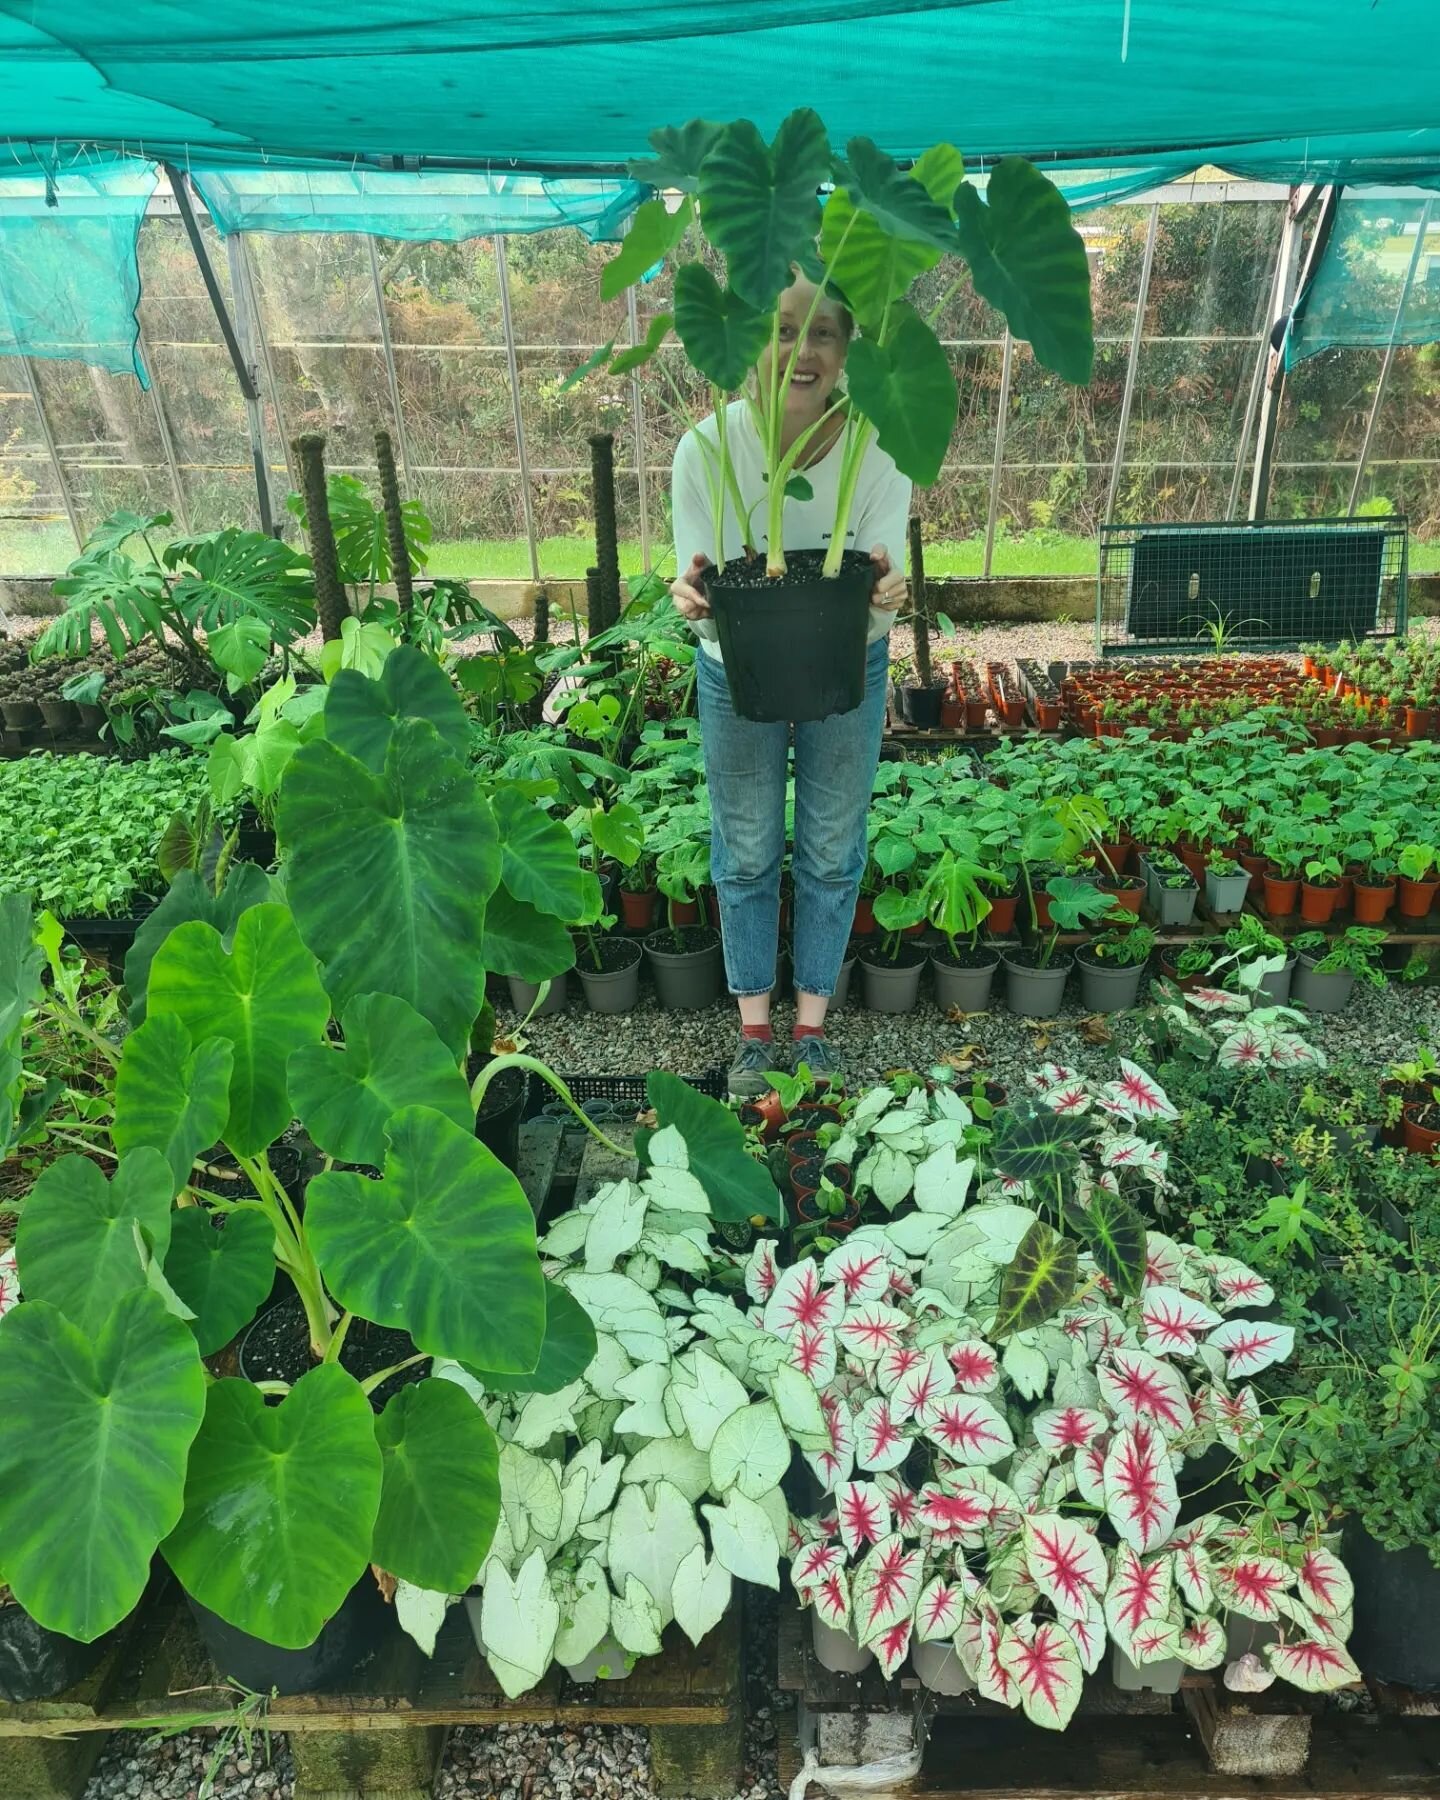 Large Colocasia esculenta and Colocasia esculenta 'Aloha'  are now online!

Christmas bundles are also ready and raring to go!!
I'm sending out a wordy newsletter tomorrow because I have some BIG news too, so if you want it, sign up on my stories 🍃 